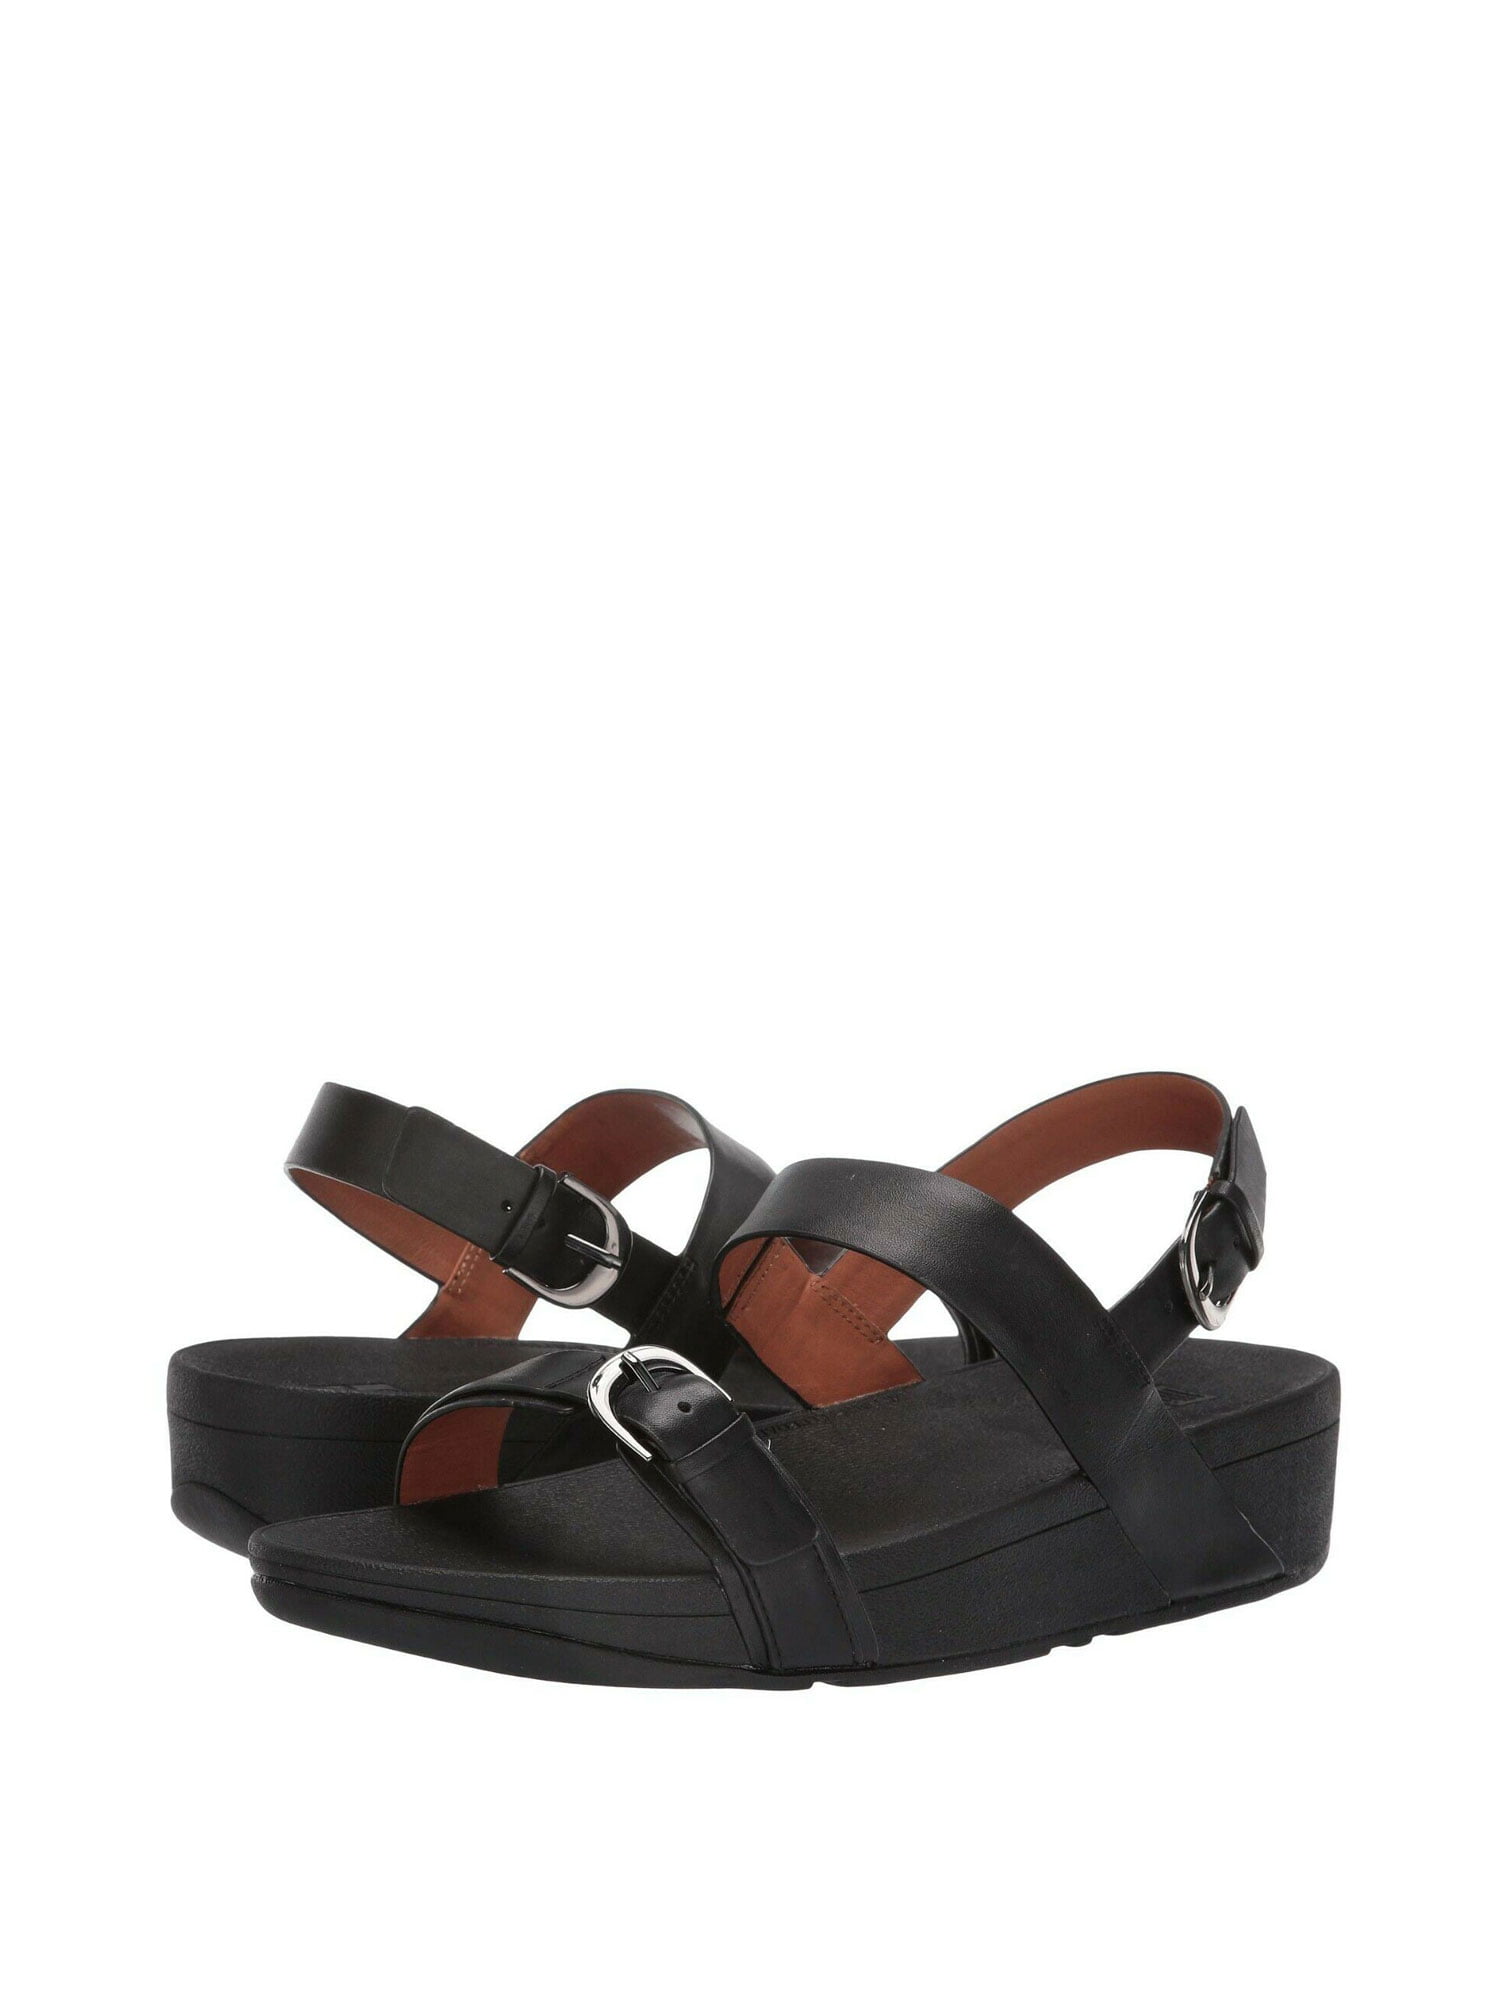 Arch Support Wedge Sandals T15-001 